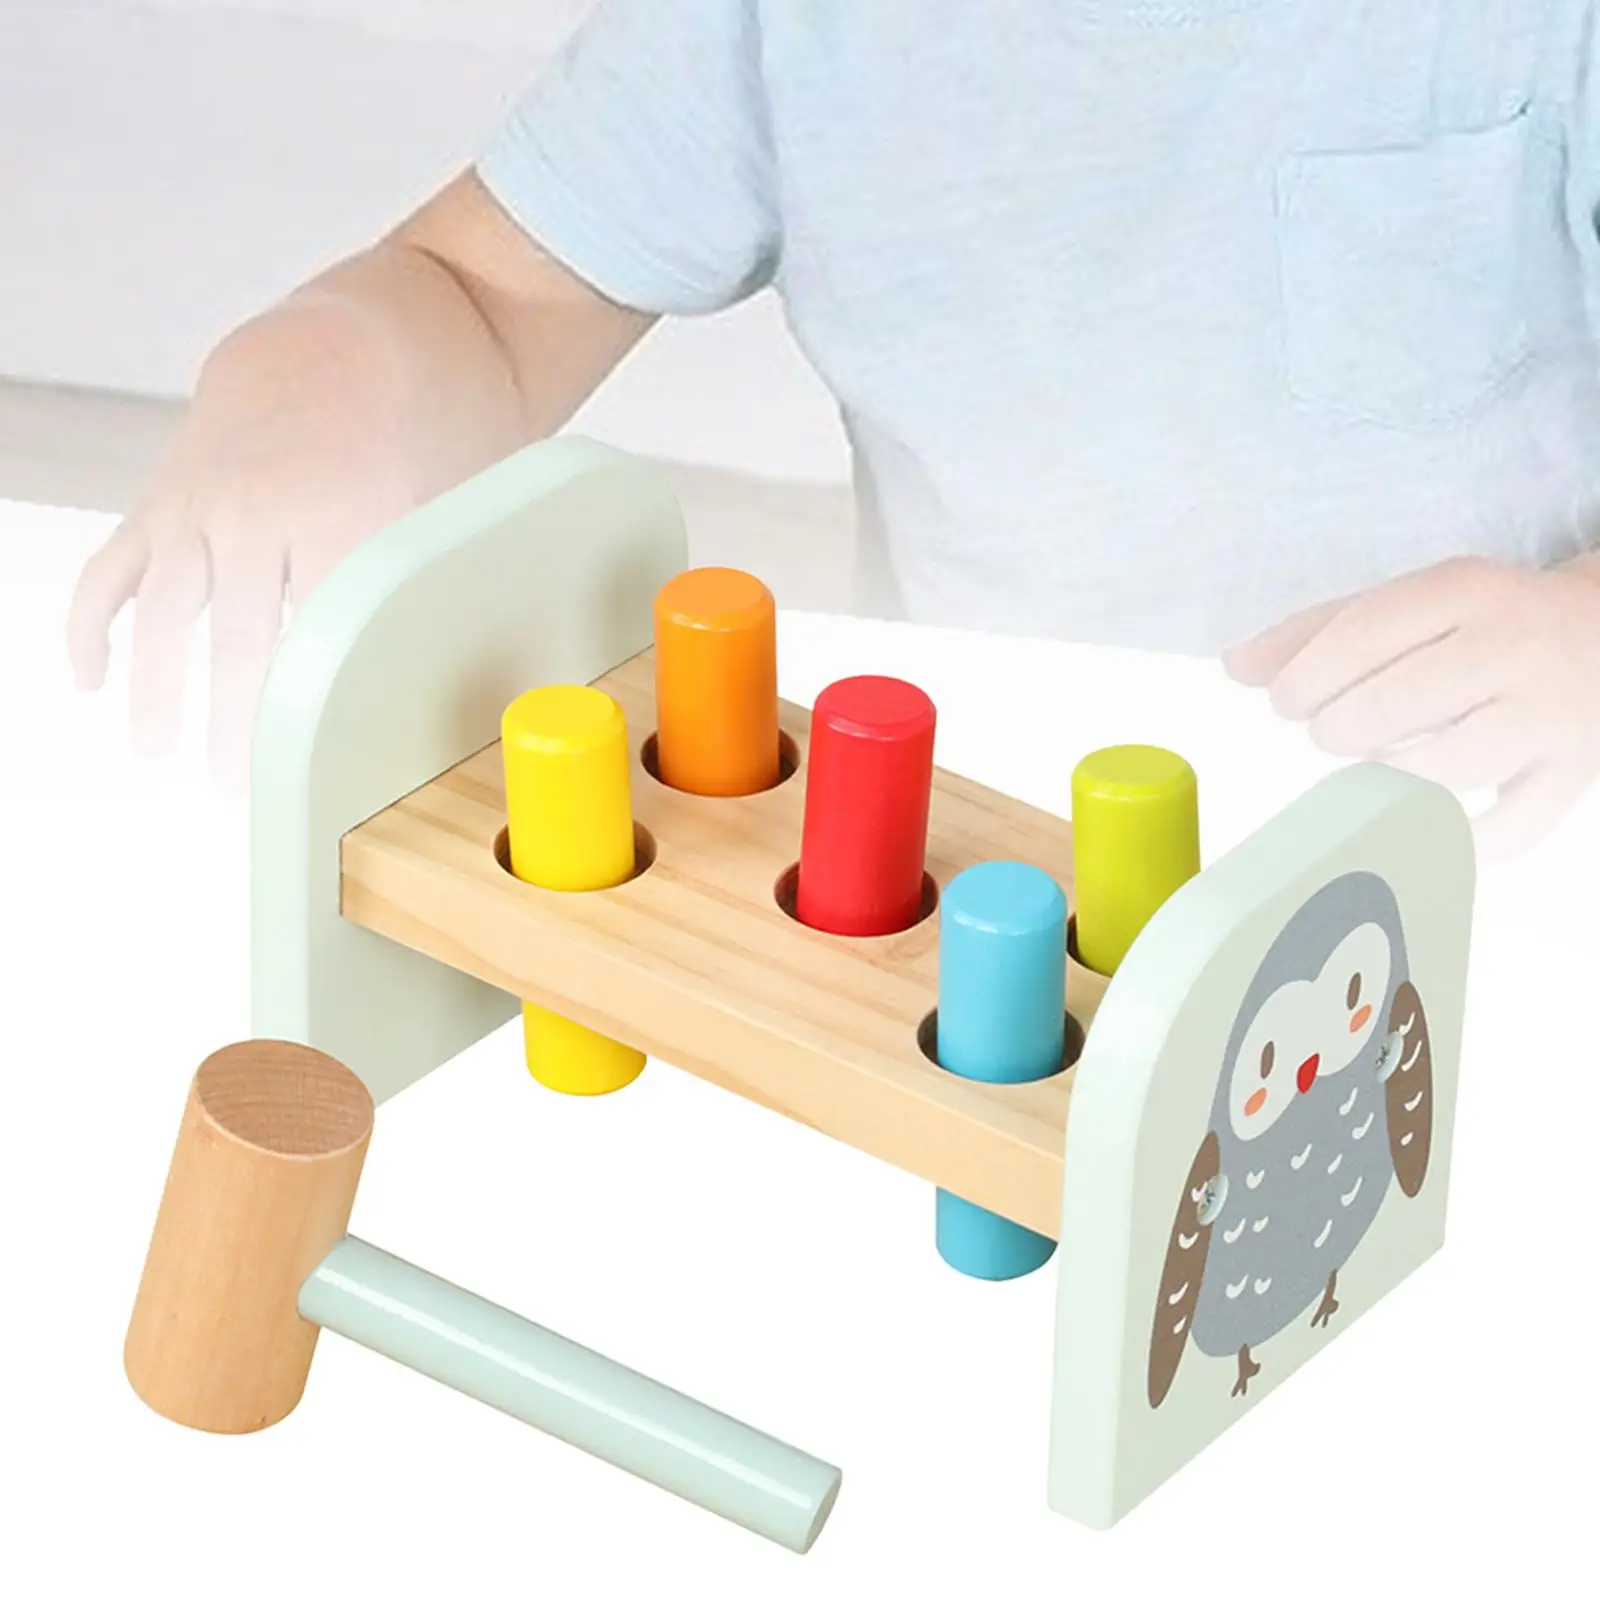 Wooden Pound Toy, Wooden Pounding Toy, Early Learning With Mallet Wooden